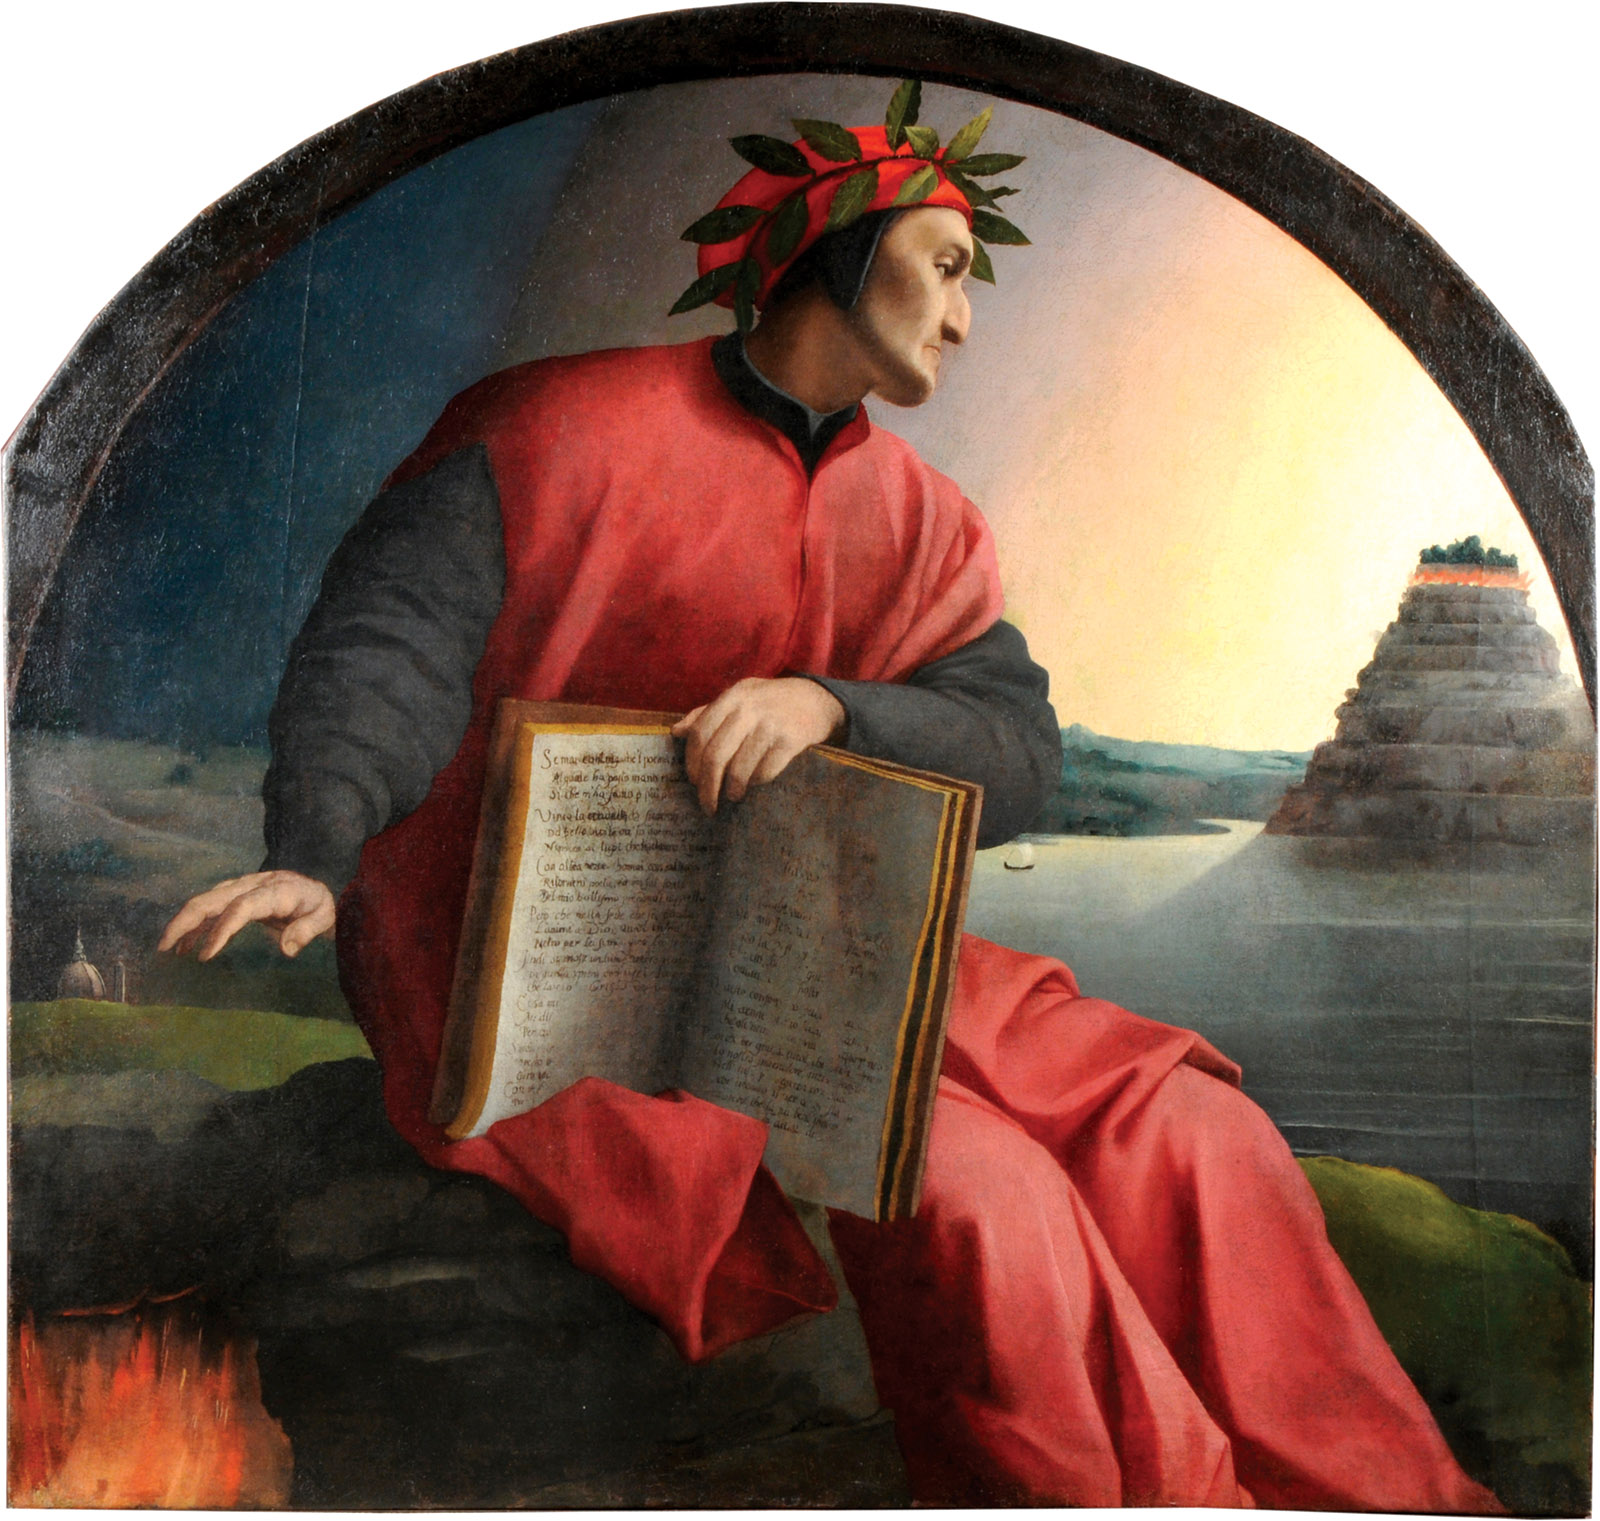 Portrait of Dante holding The Divine Comedy open to canto 25 of Paradiso and looking at Mount Purgatory